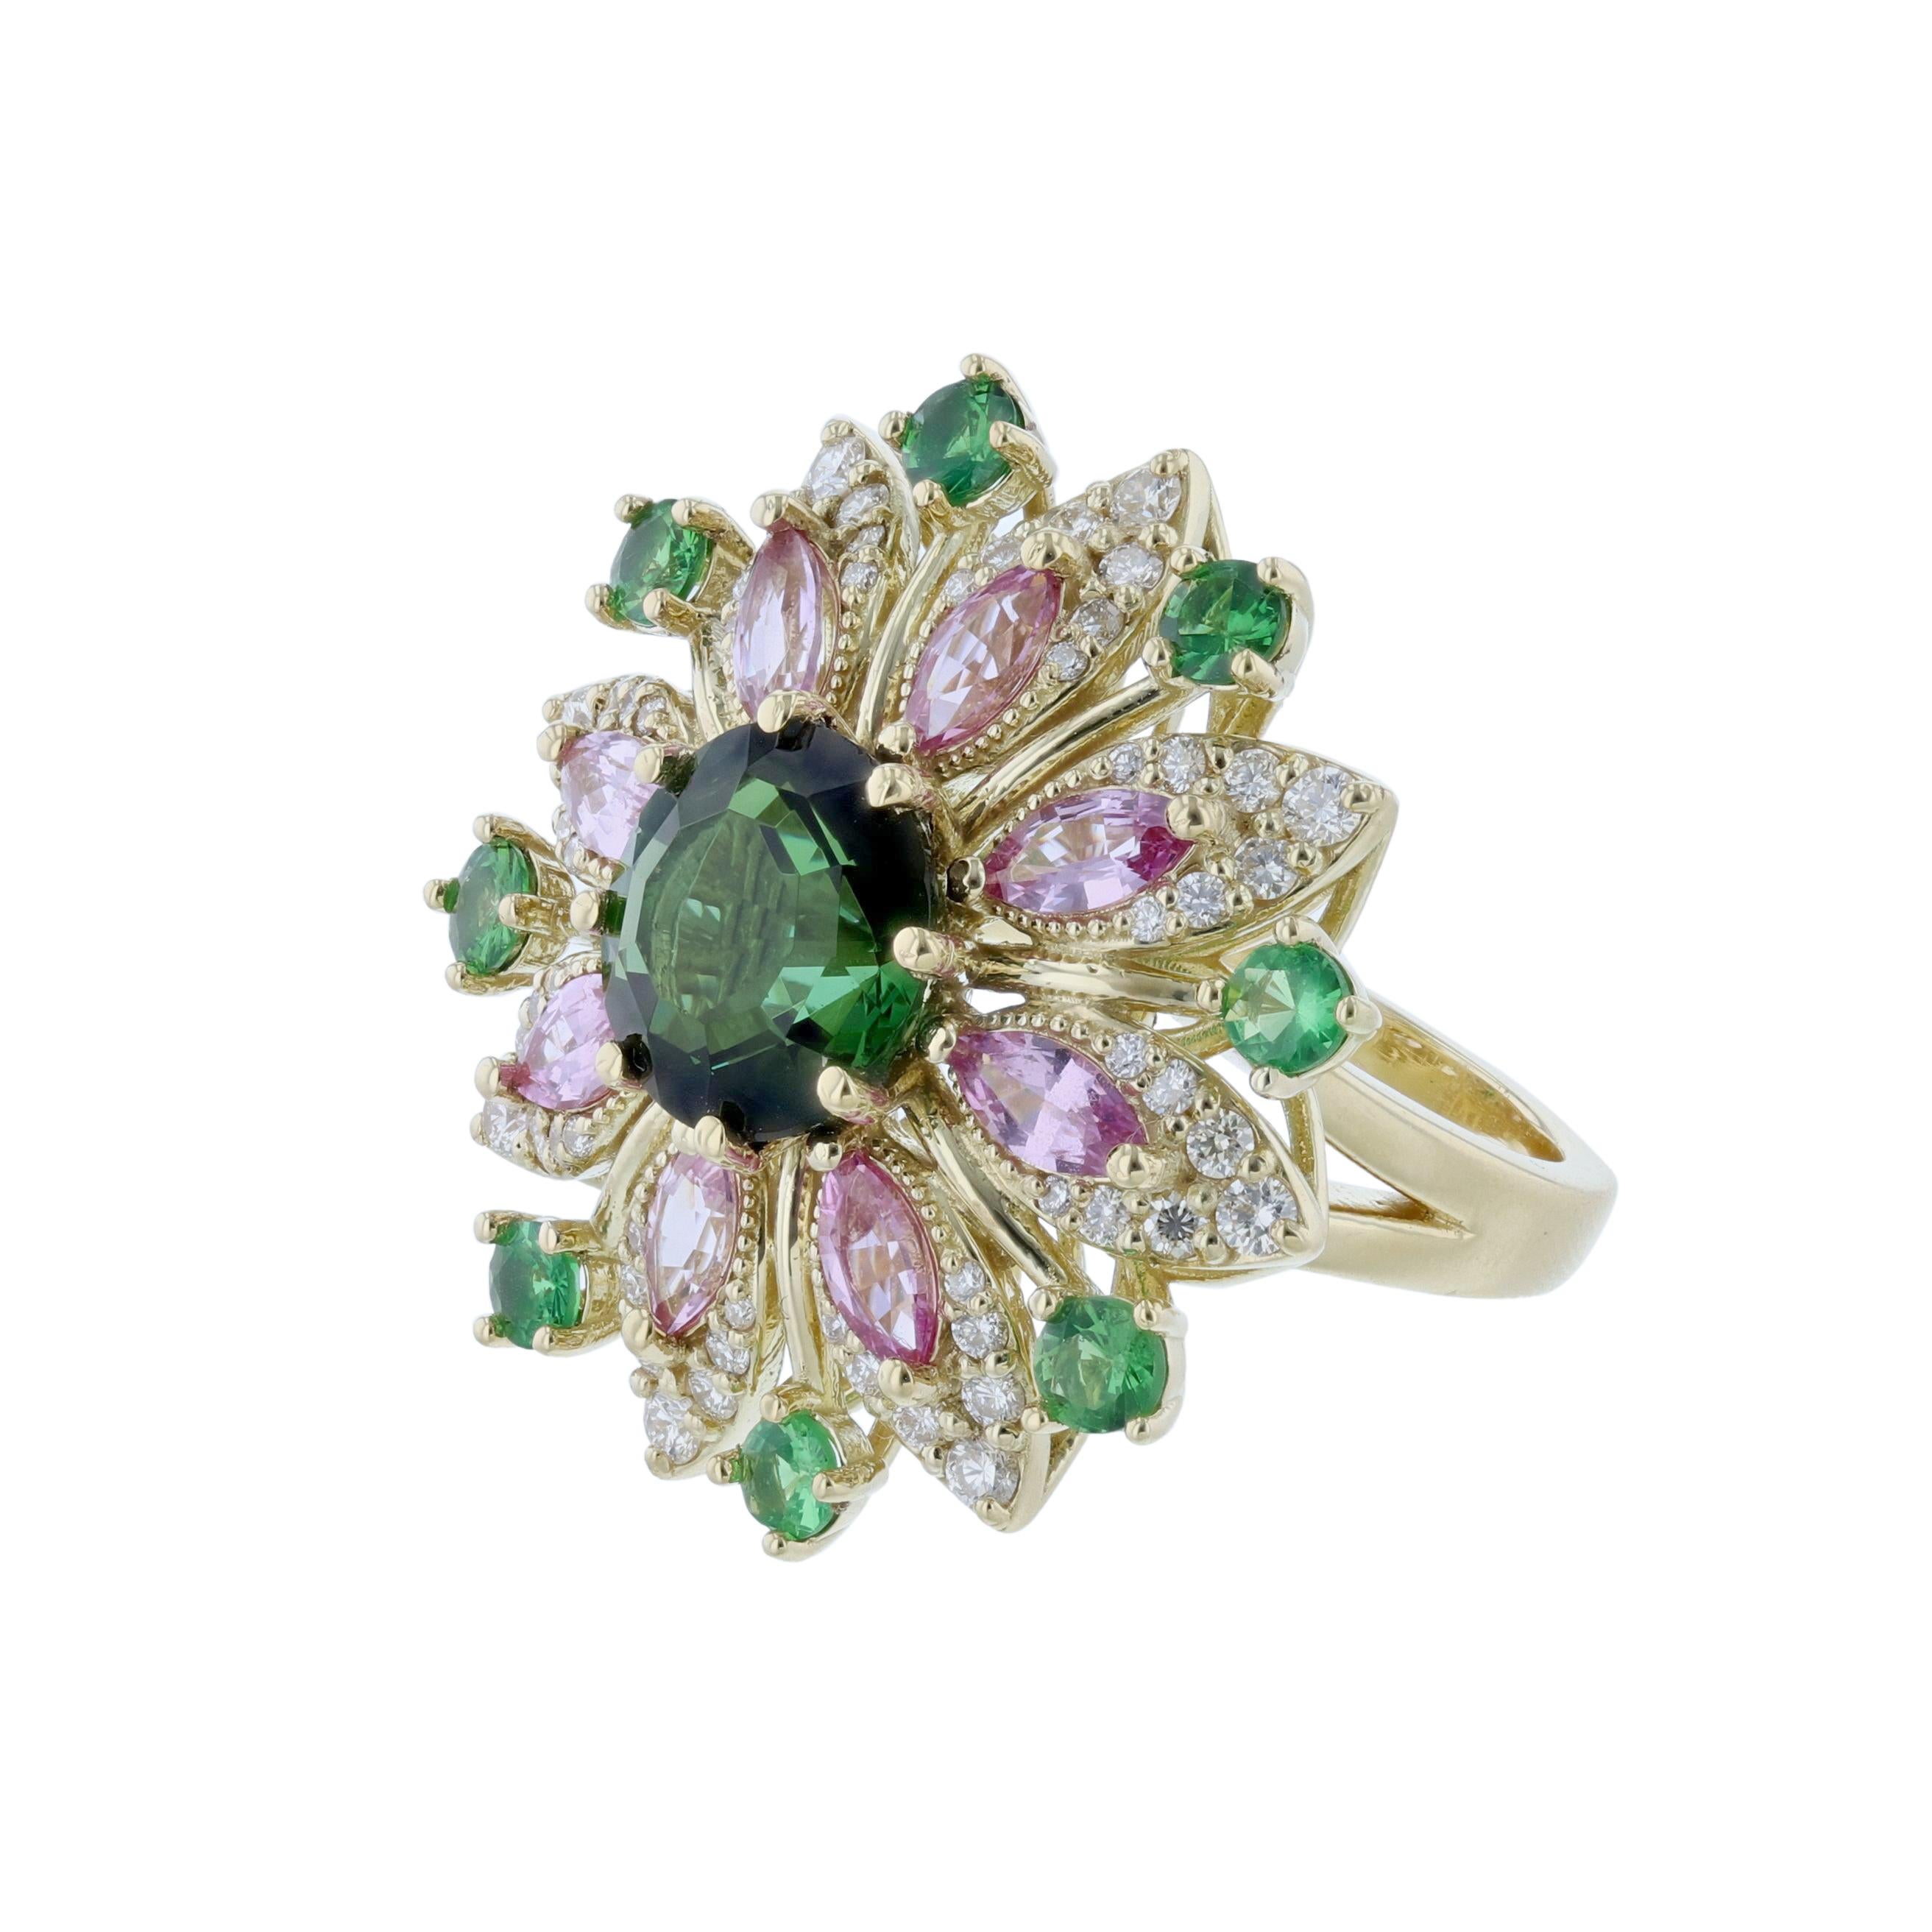 This ring is made in 14K yellow gold featuring 1 green tourmaline center stone weighing 4.15 carats. 8 marquise pink sapphires weighing 1.88 carats. Surrounded by 56 round cut diamonds weighing 0.75 carats. As well as 8 green round tsavorite accents